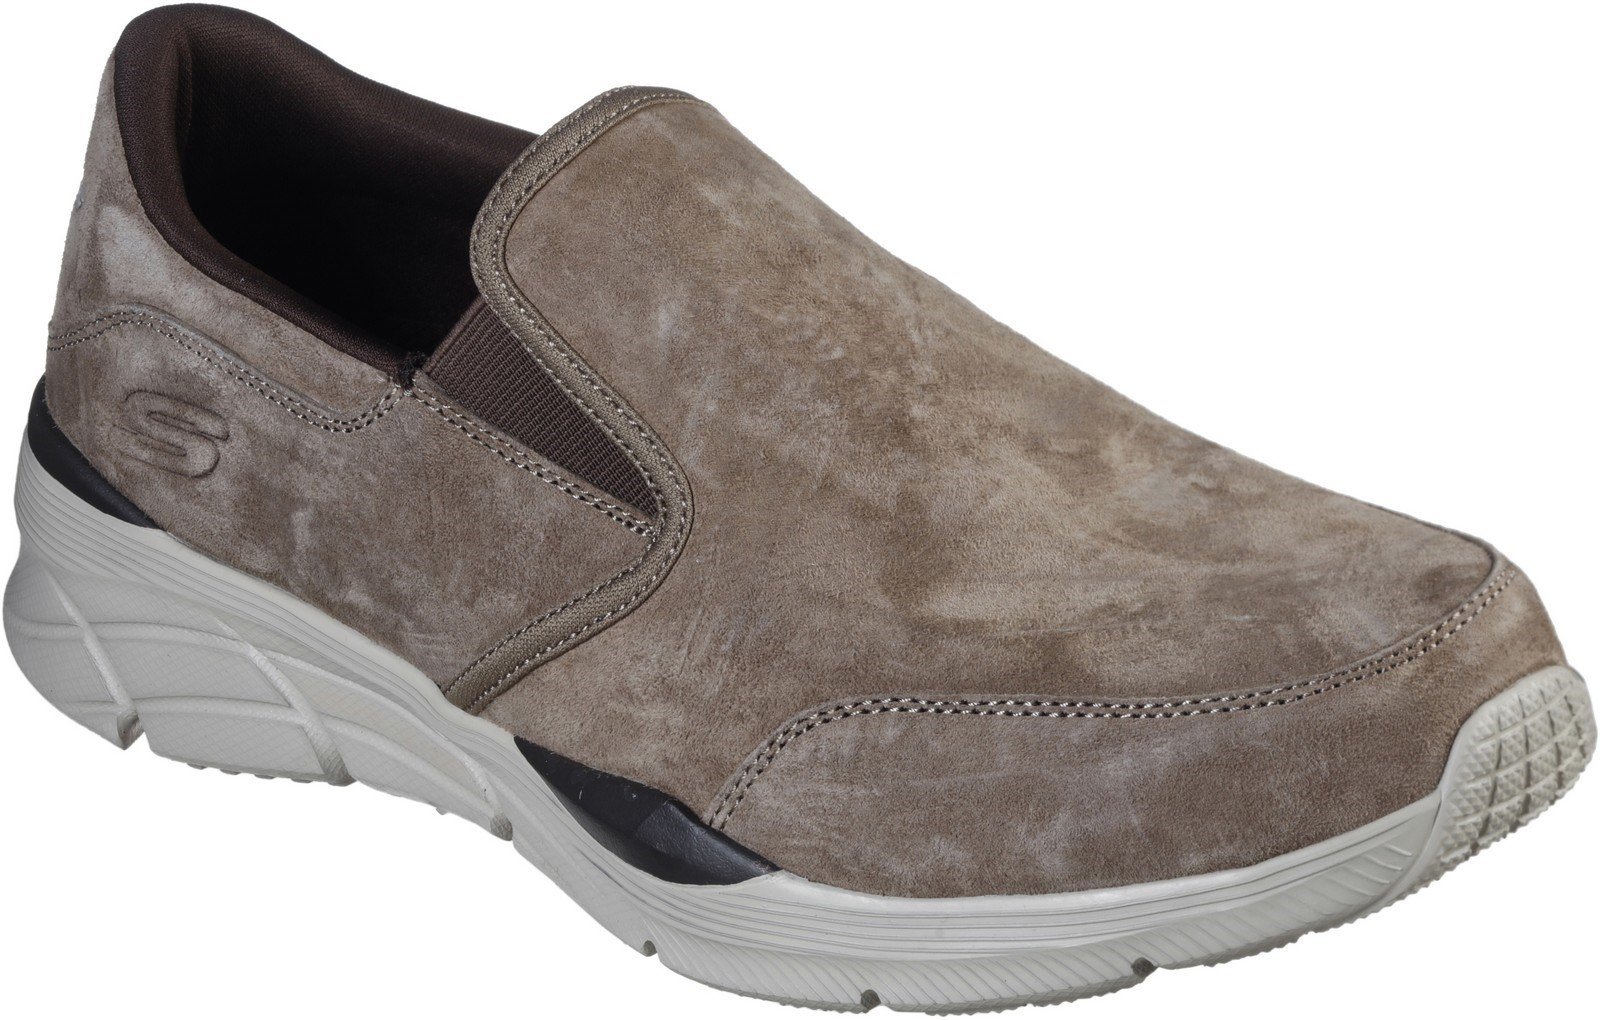 Skechers Unisex Equalizer 4.0 Myrko Trainers Various Colours 30366 - Brown 6